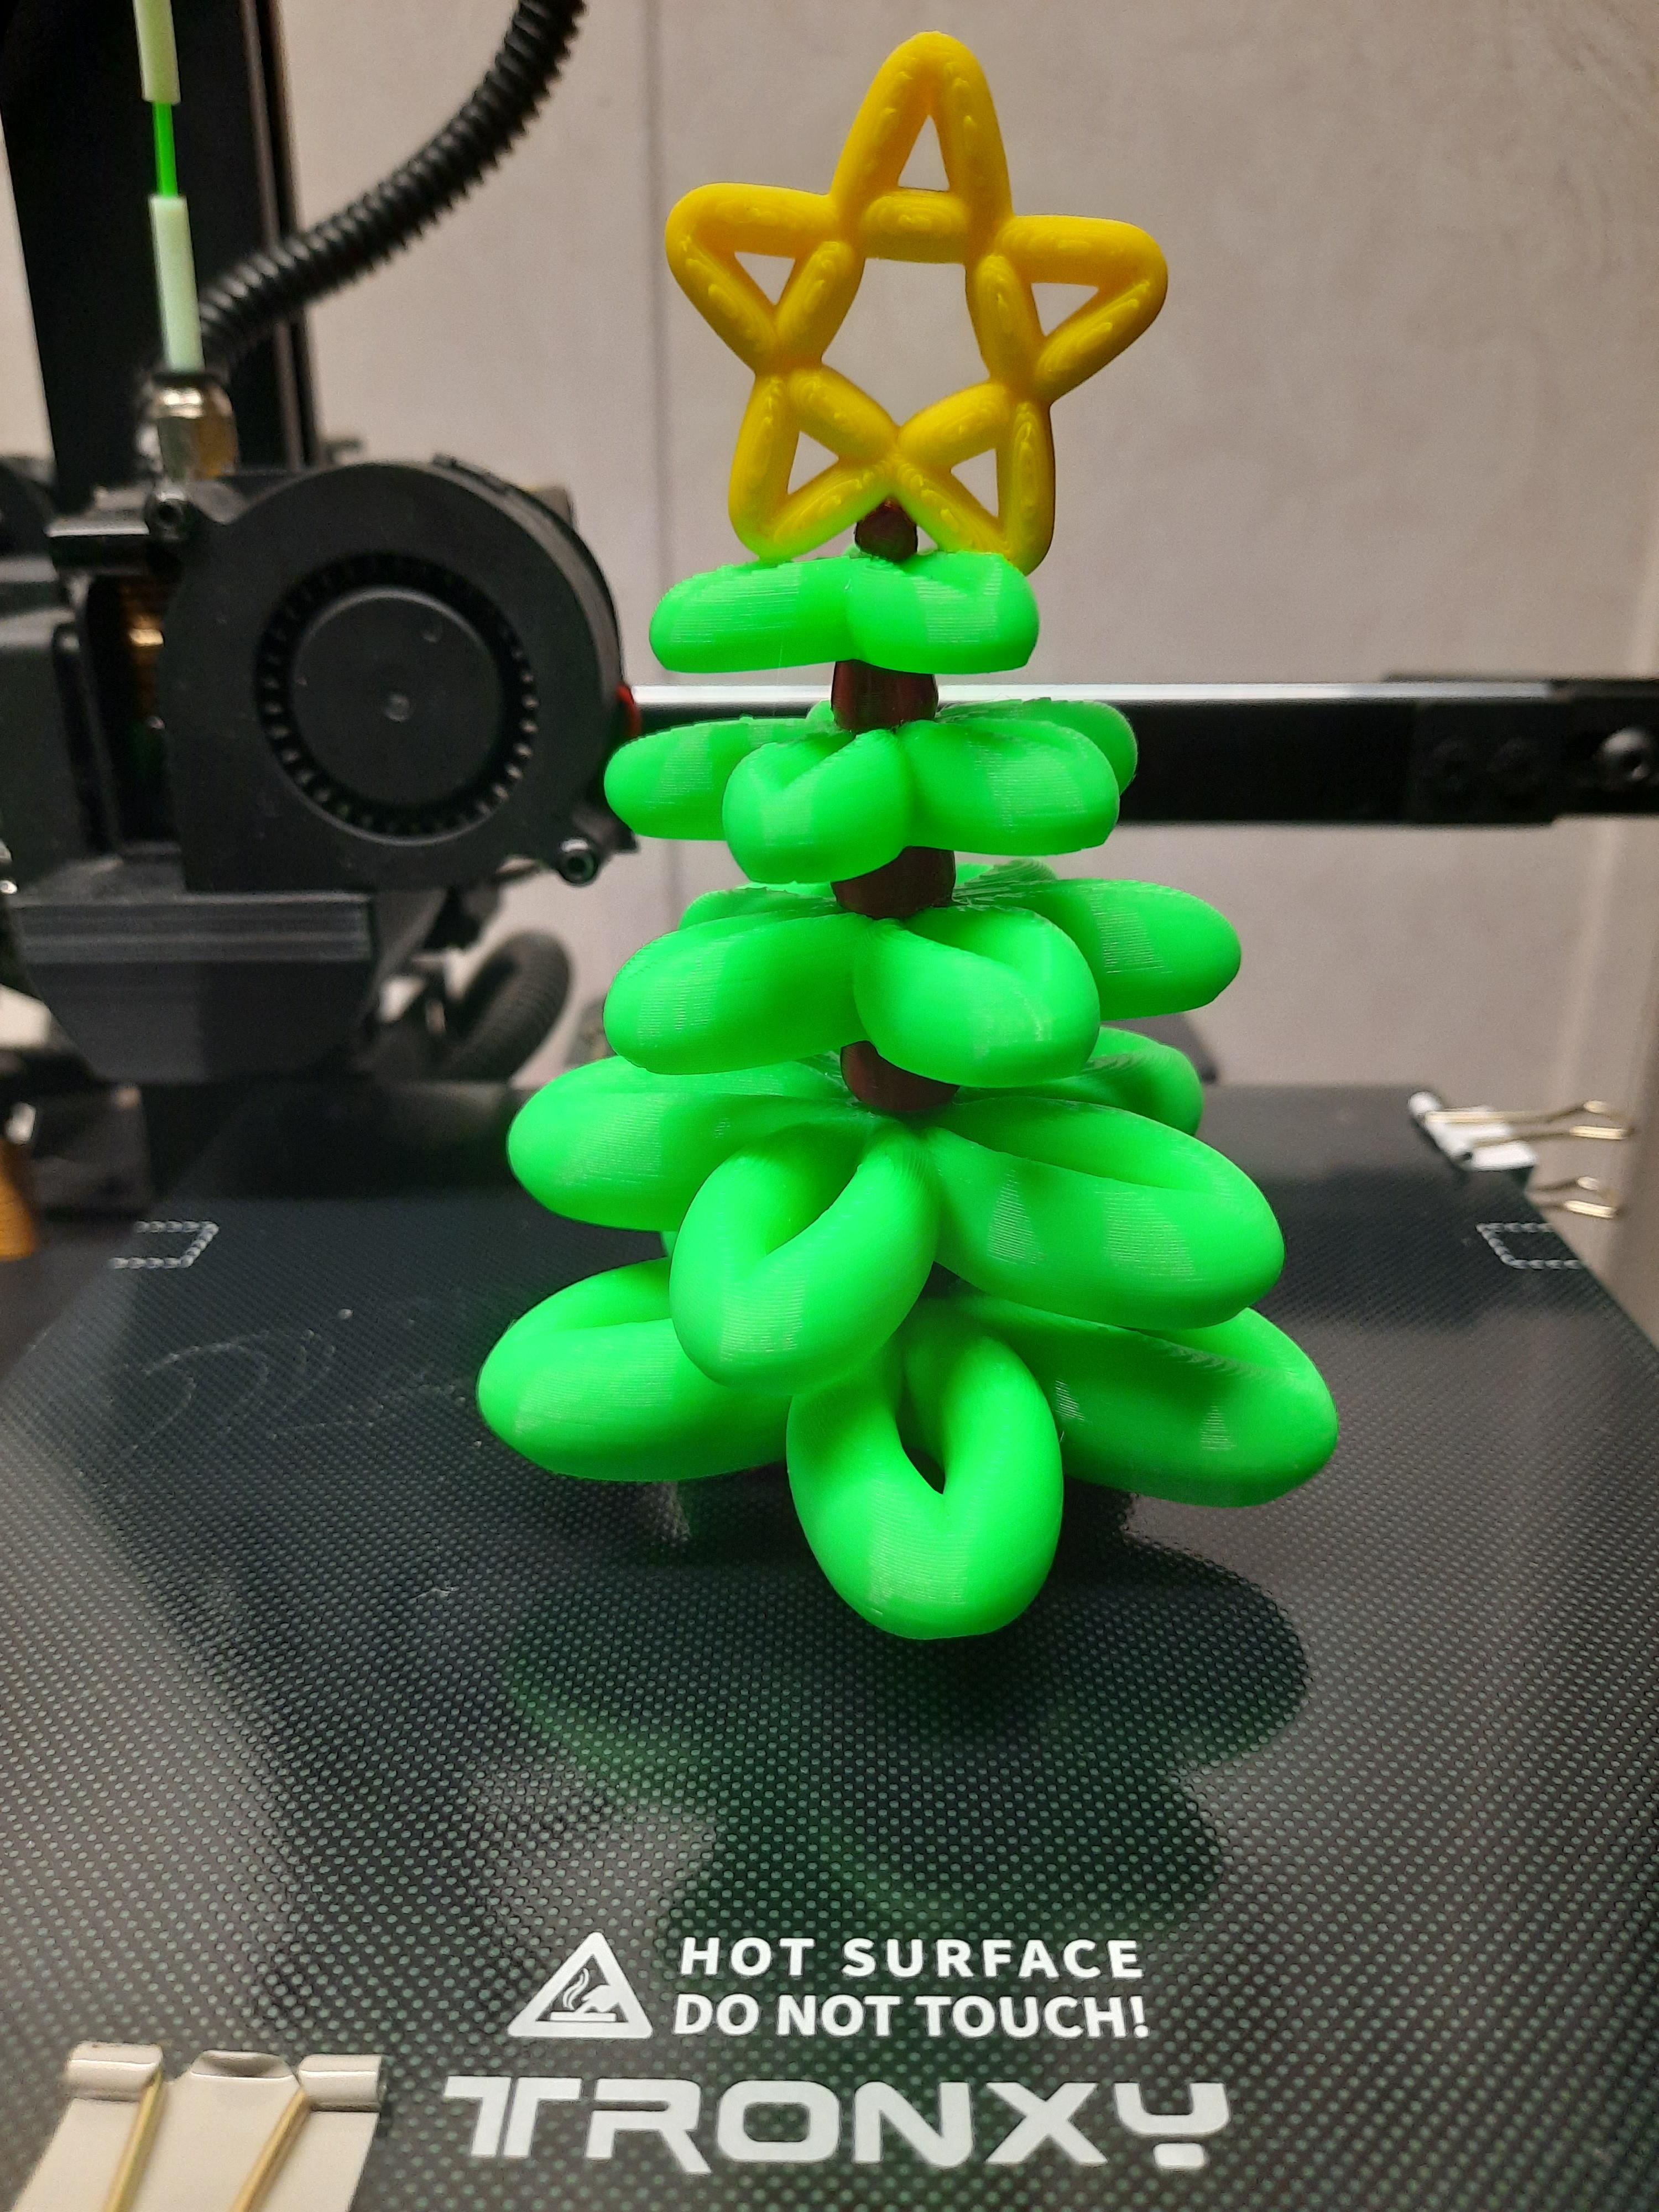 Balloon Christmas Tree - Thanks Chelsea 👋 
I printed it at 48% scale so all the branches would fit in one print on my tiny tronxy crux 1
Thanks for sharing your amazing talent with us 🎄  - 3d model